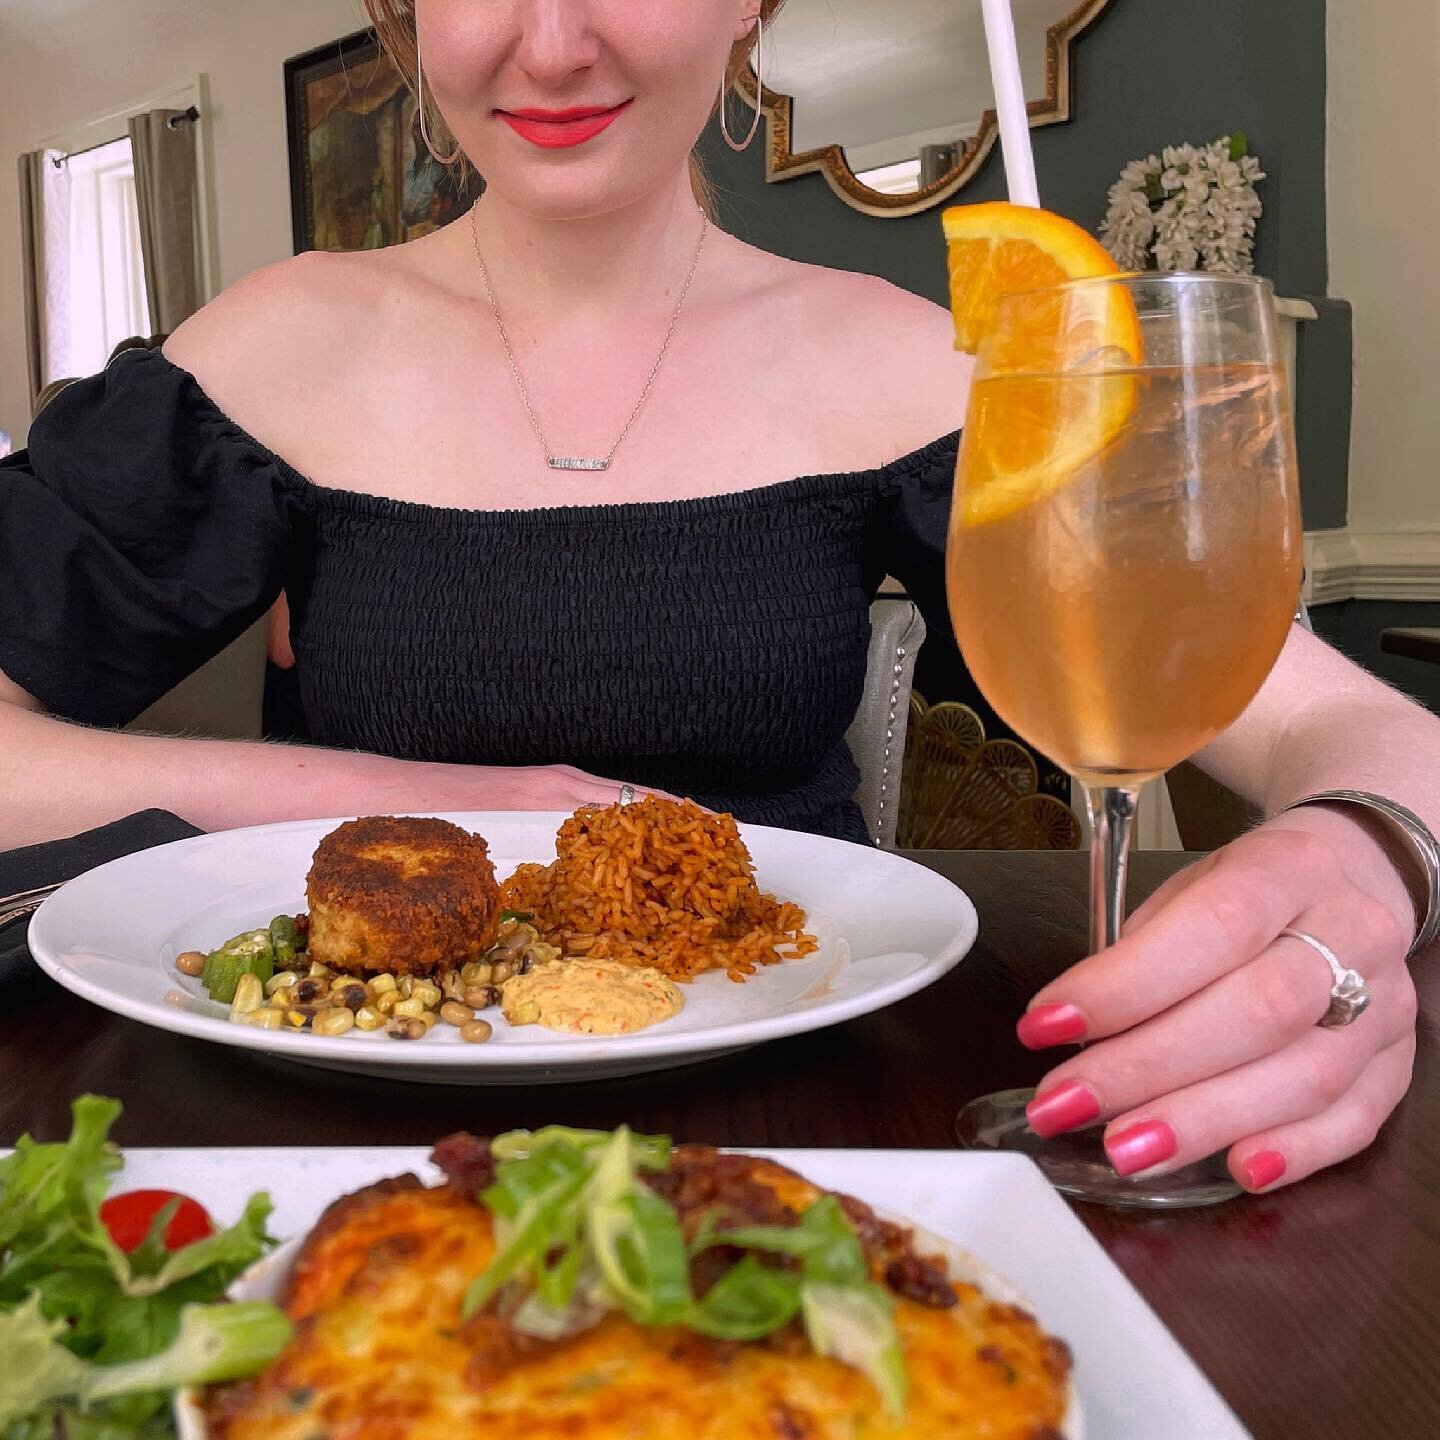 Southern Comfort 🍅🌽🥧
&bull;
#tomatopie #crabcakes #peachsangria #queenssangria #82queencharleston #southofbroad #charlestonsc #charlestoneats #chseats #eateateat #eatup #drinkup #drinktime #lunchplate #lunchdate #southerncooking #southernsummer